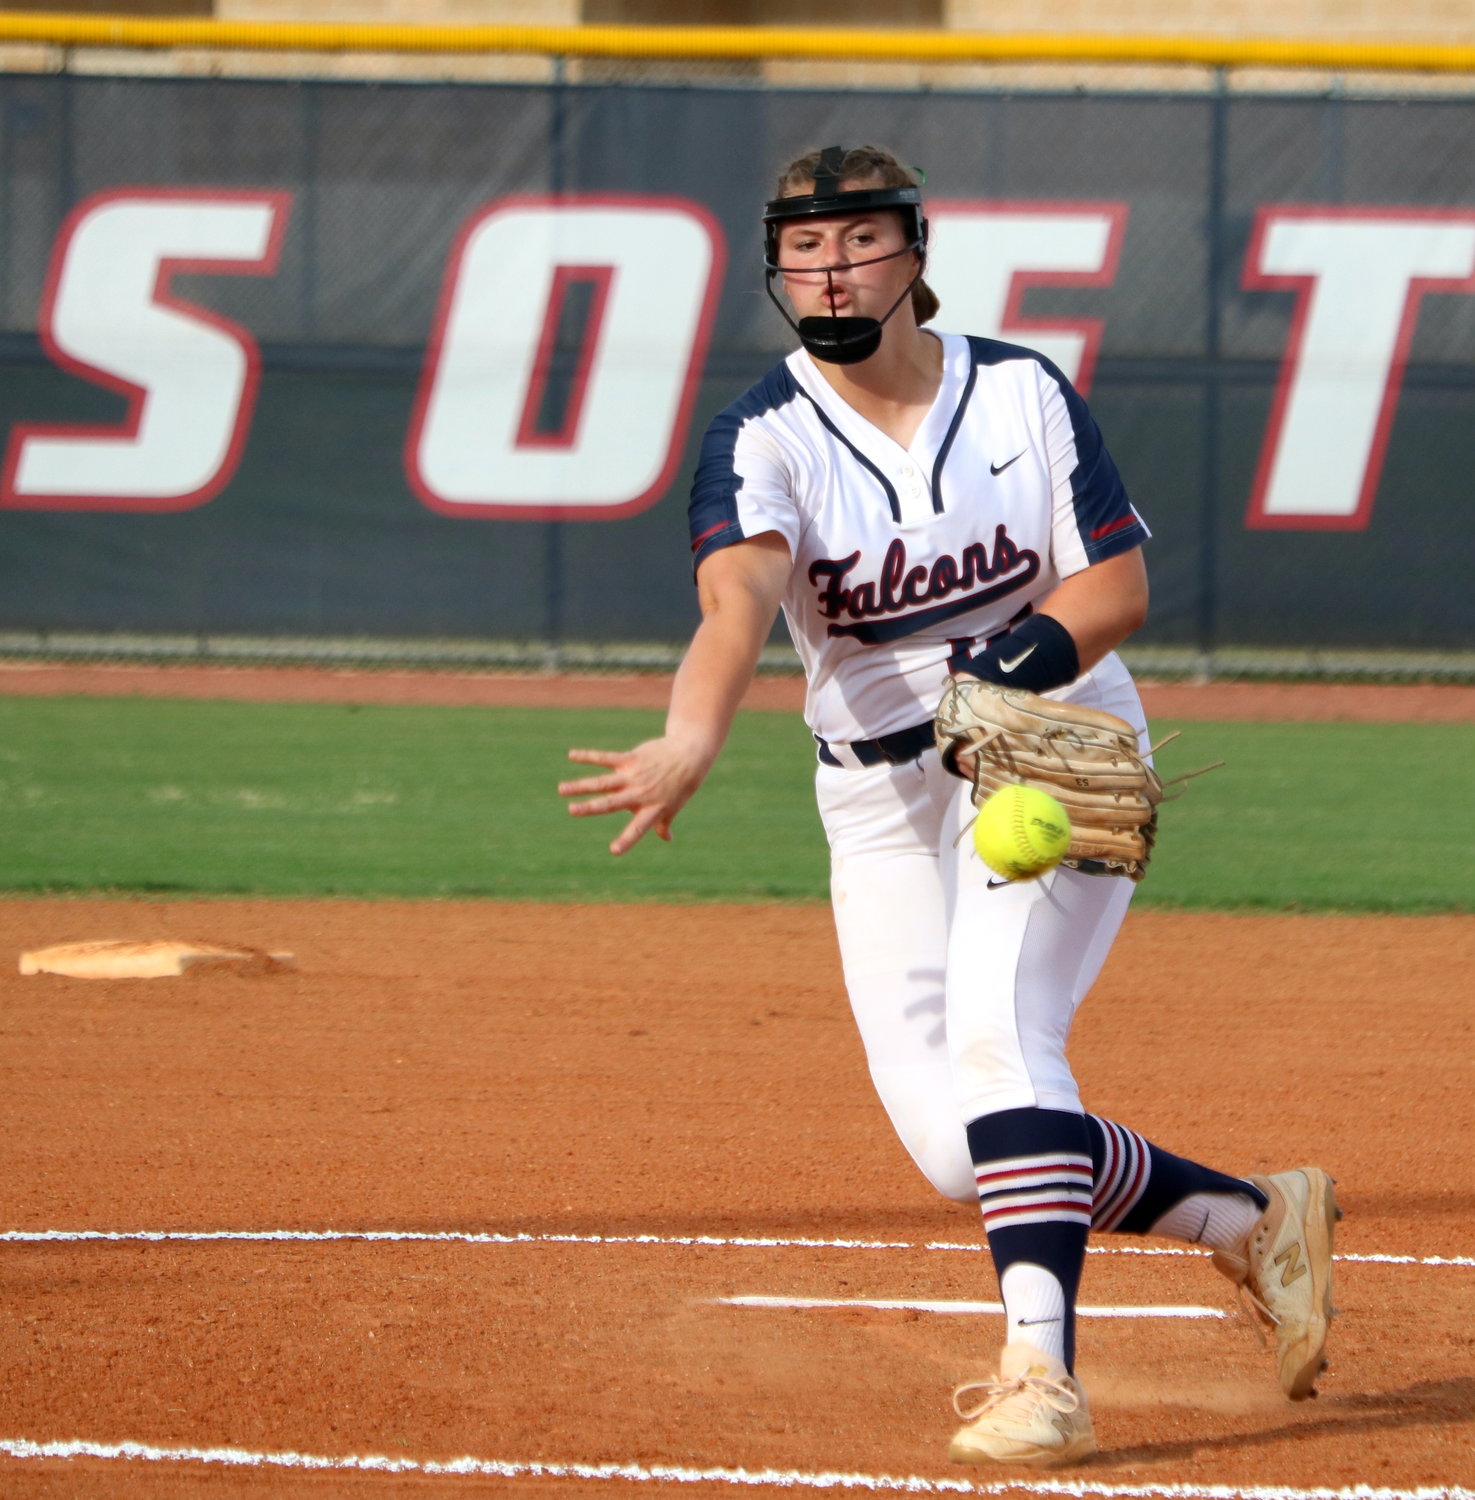 Samantha Crumrin pitches during a bi-district game between Tompkins and George Ranch at the Tompkins softball field.